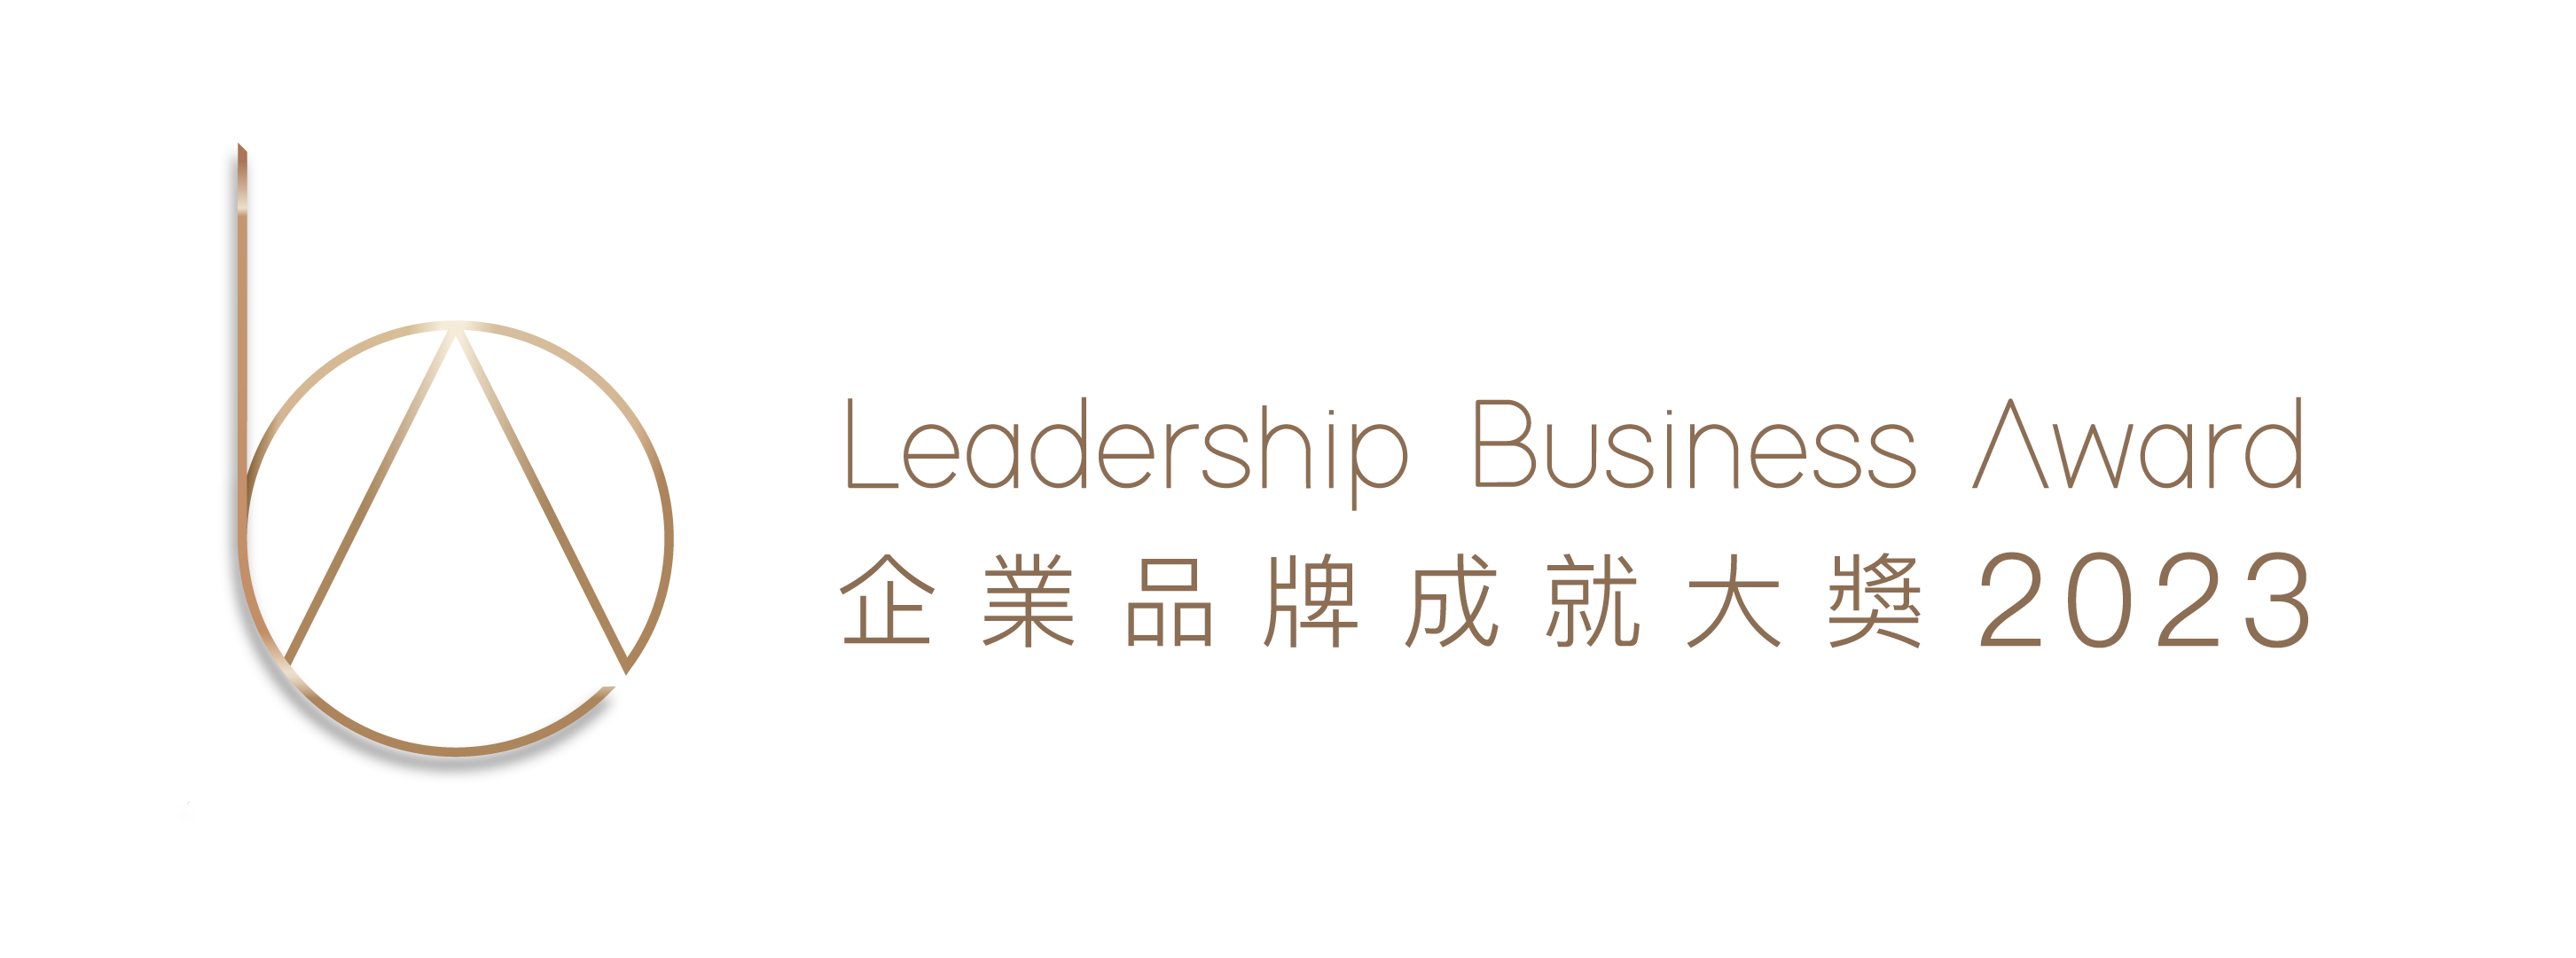 Now Business News Channel Leadership Business Award 2023